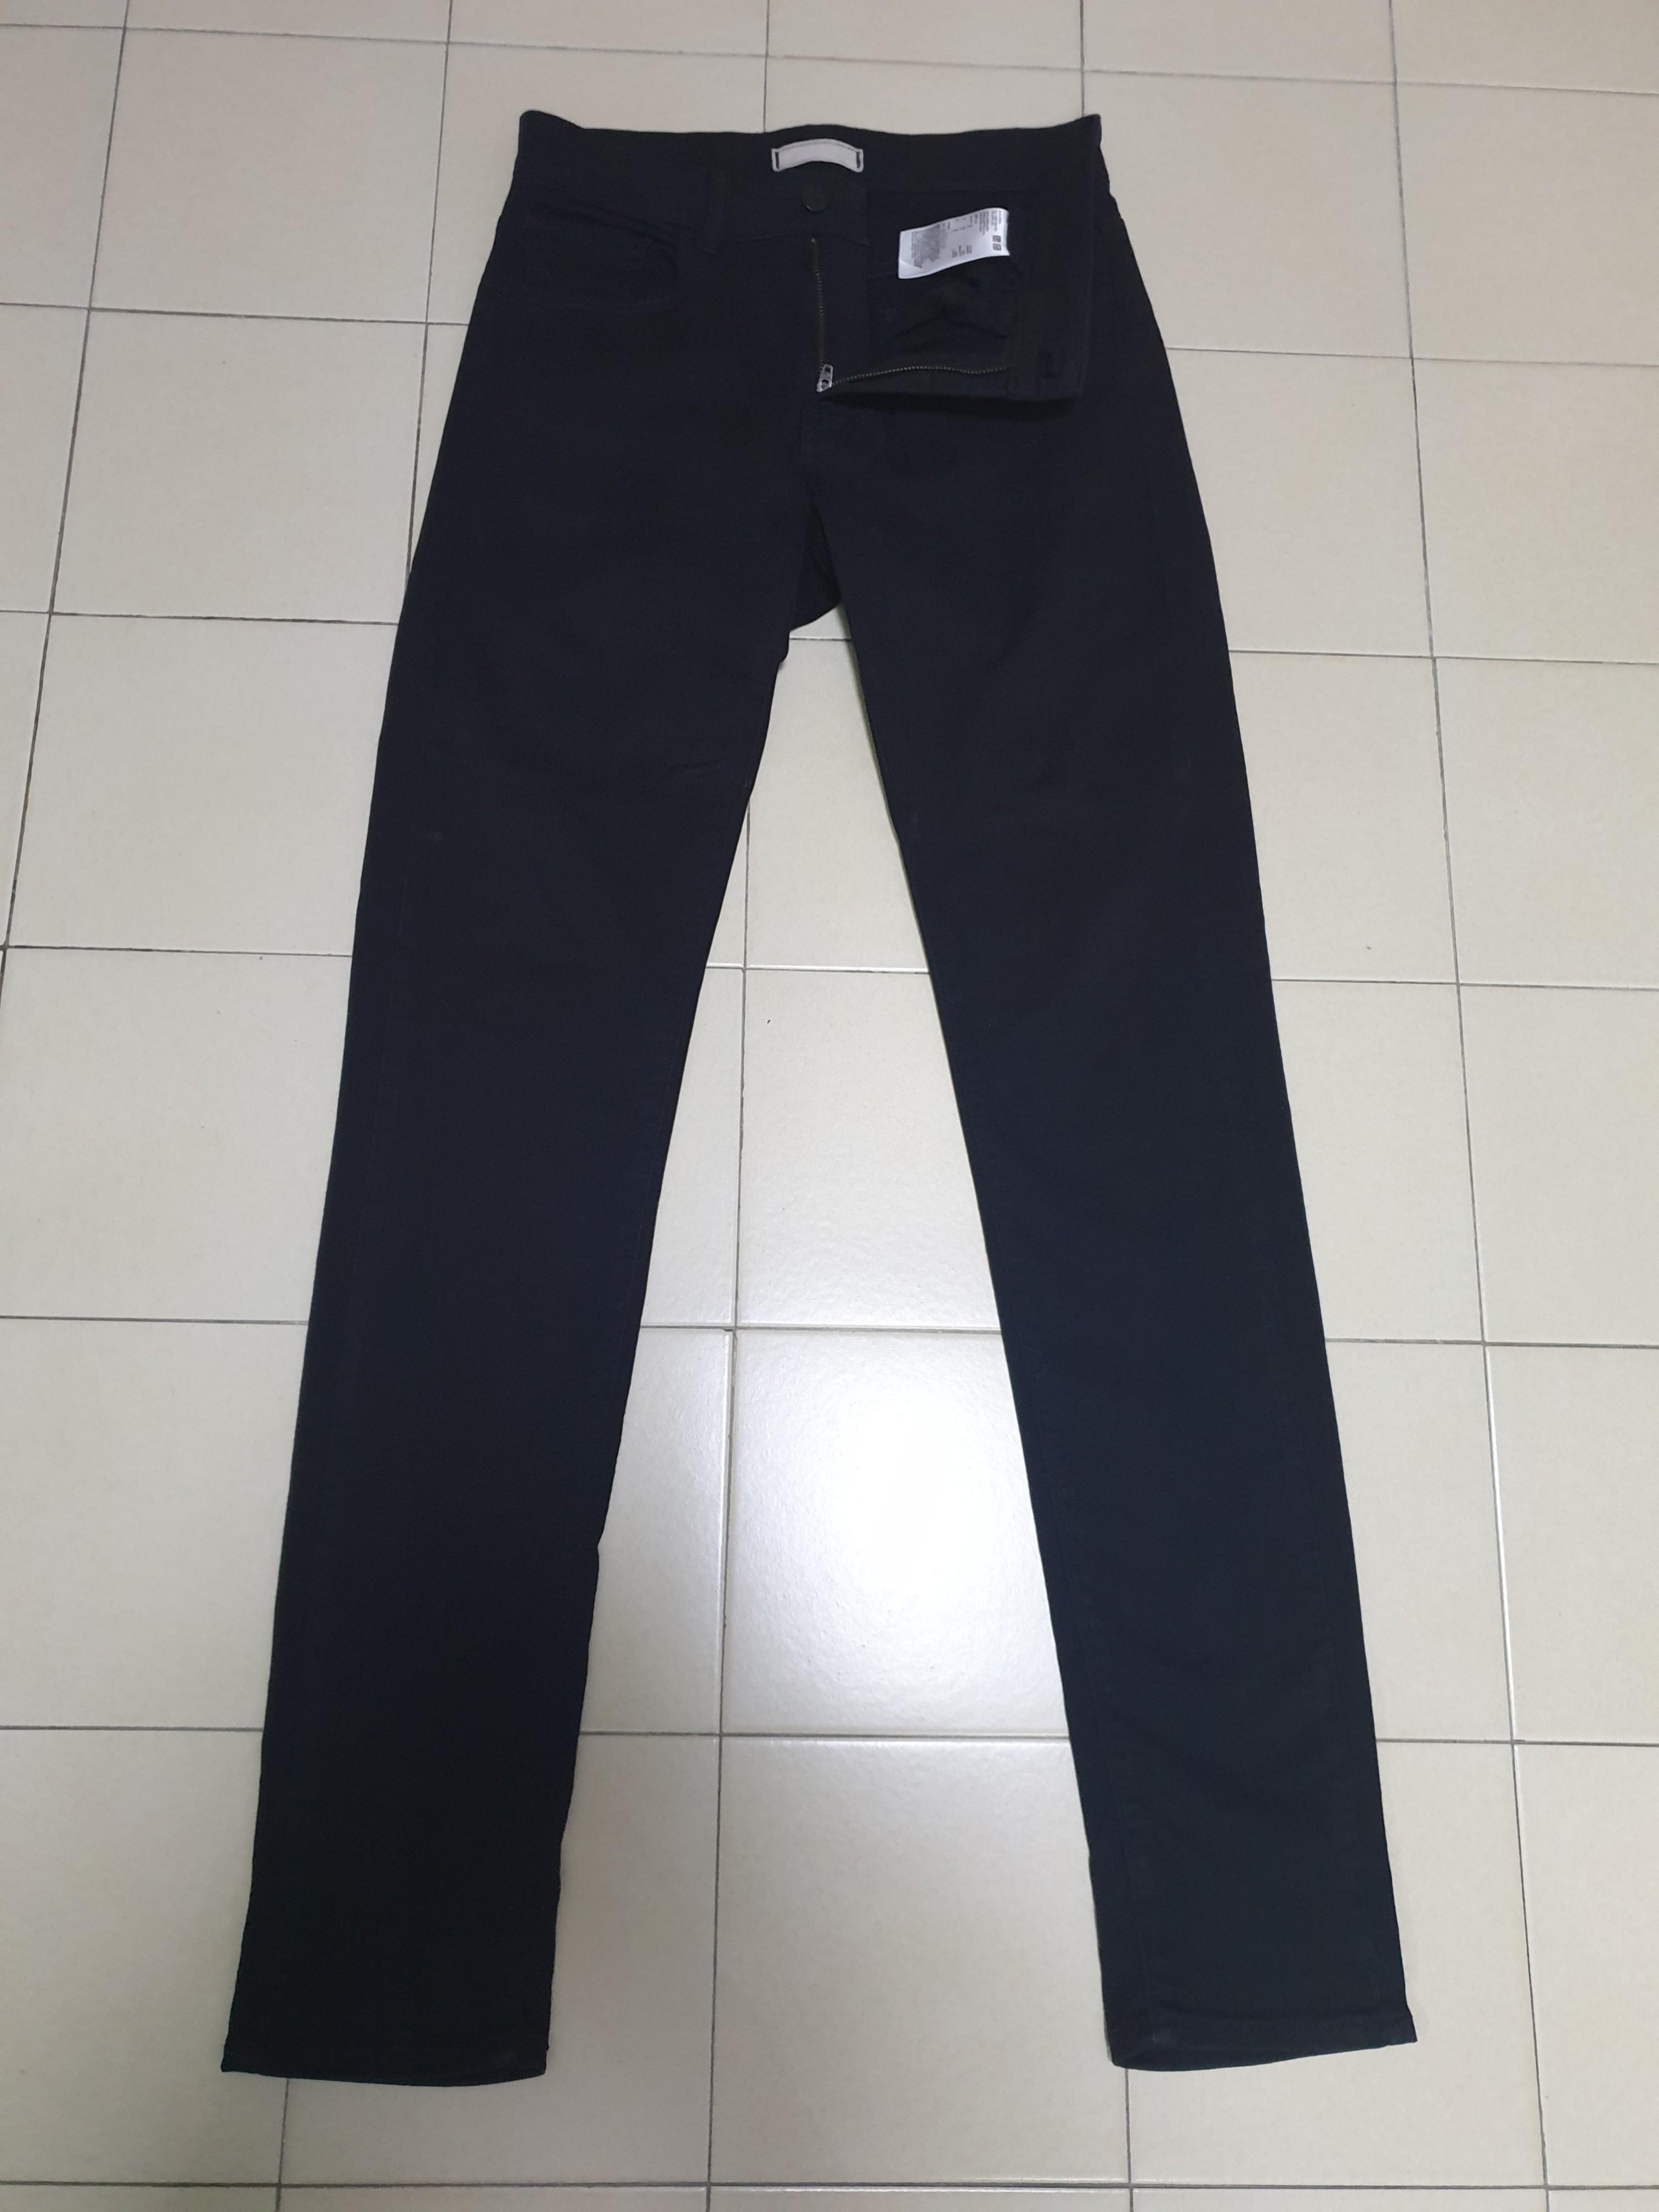 charcoal grey skinny jeans